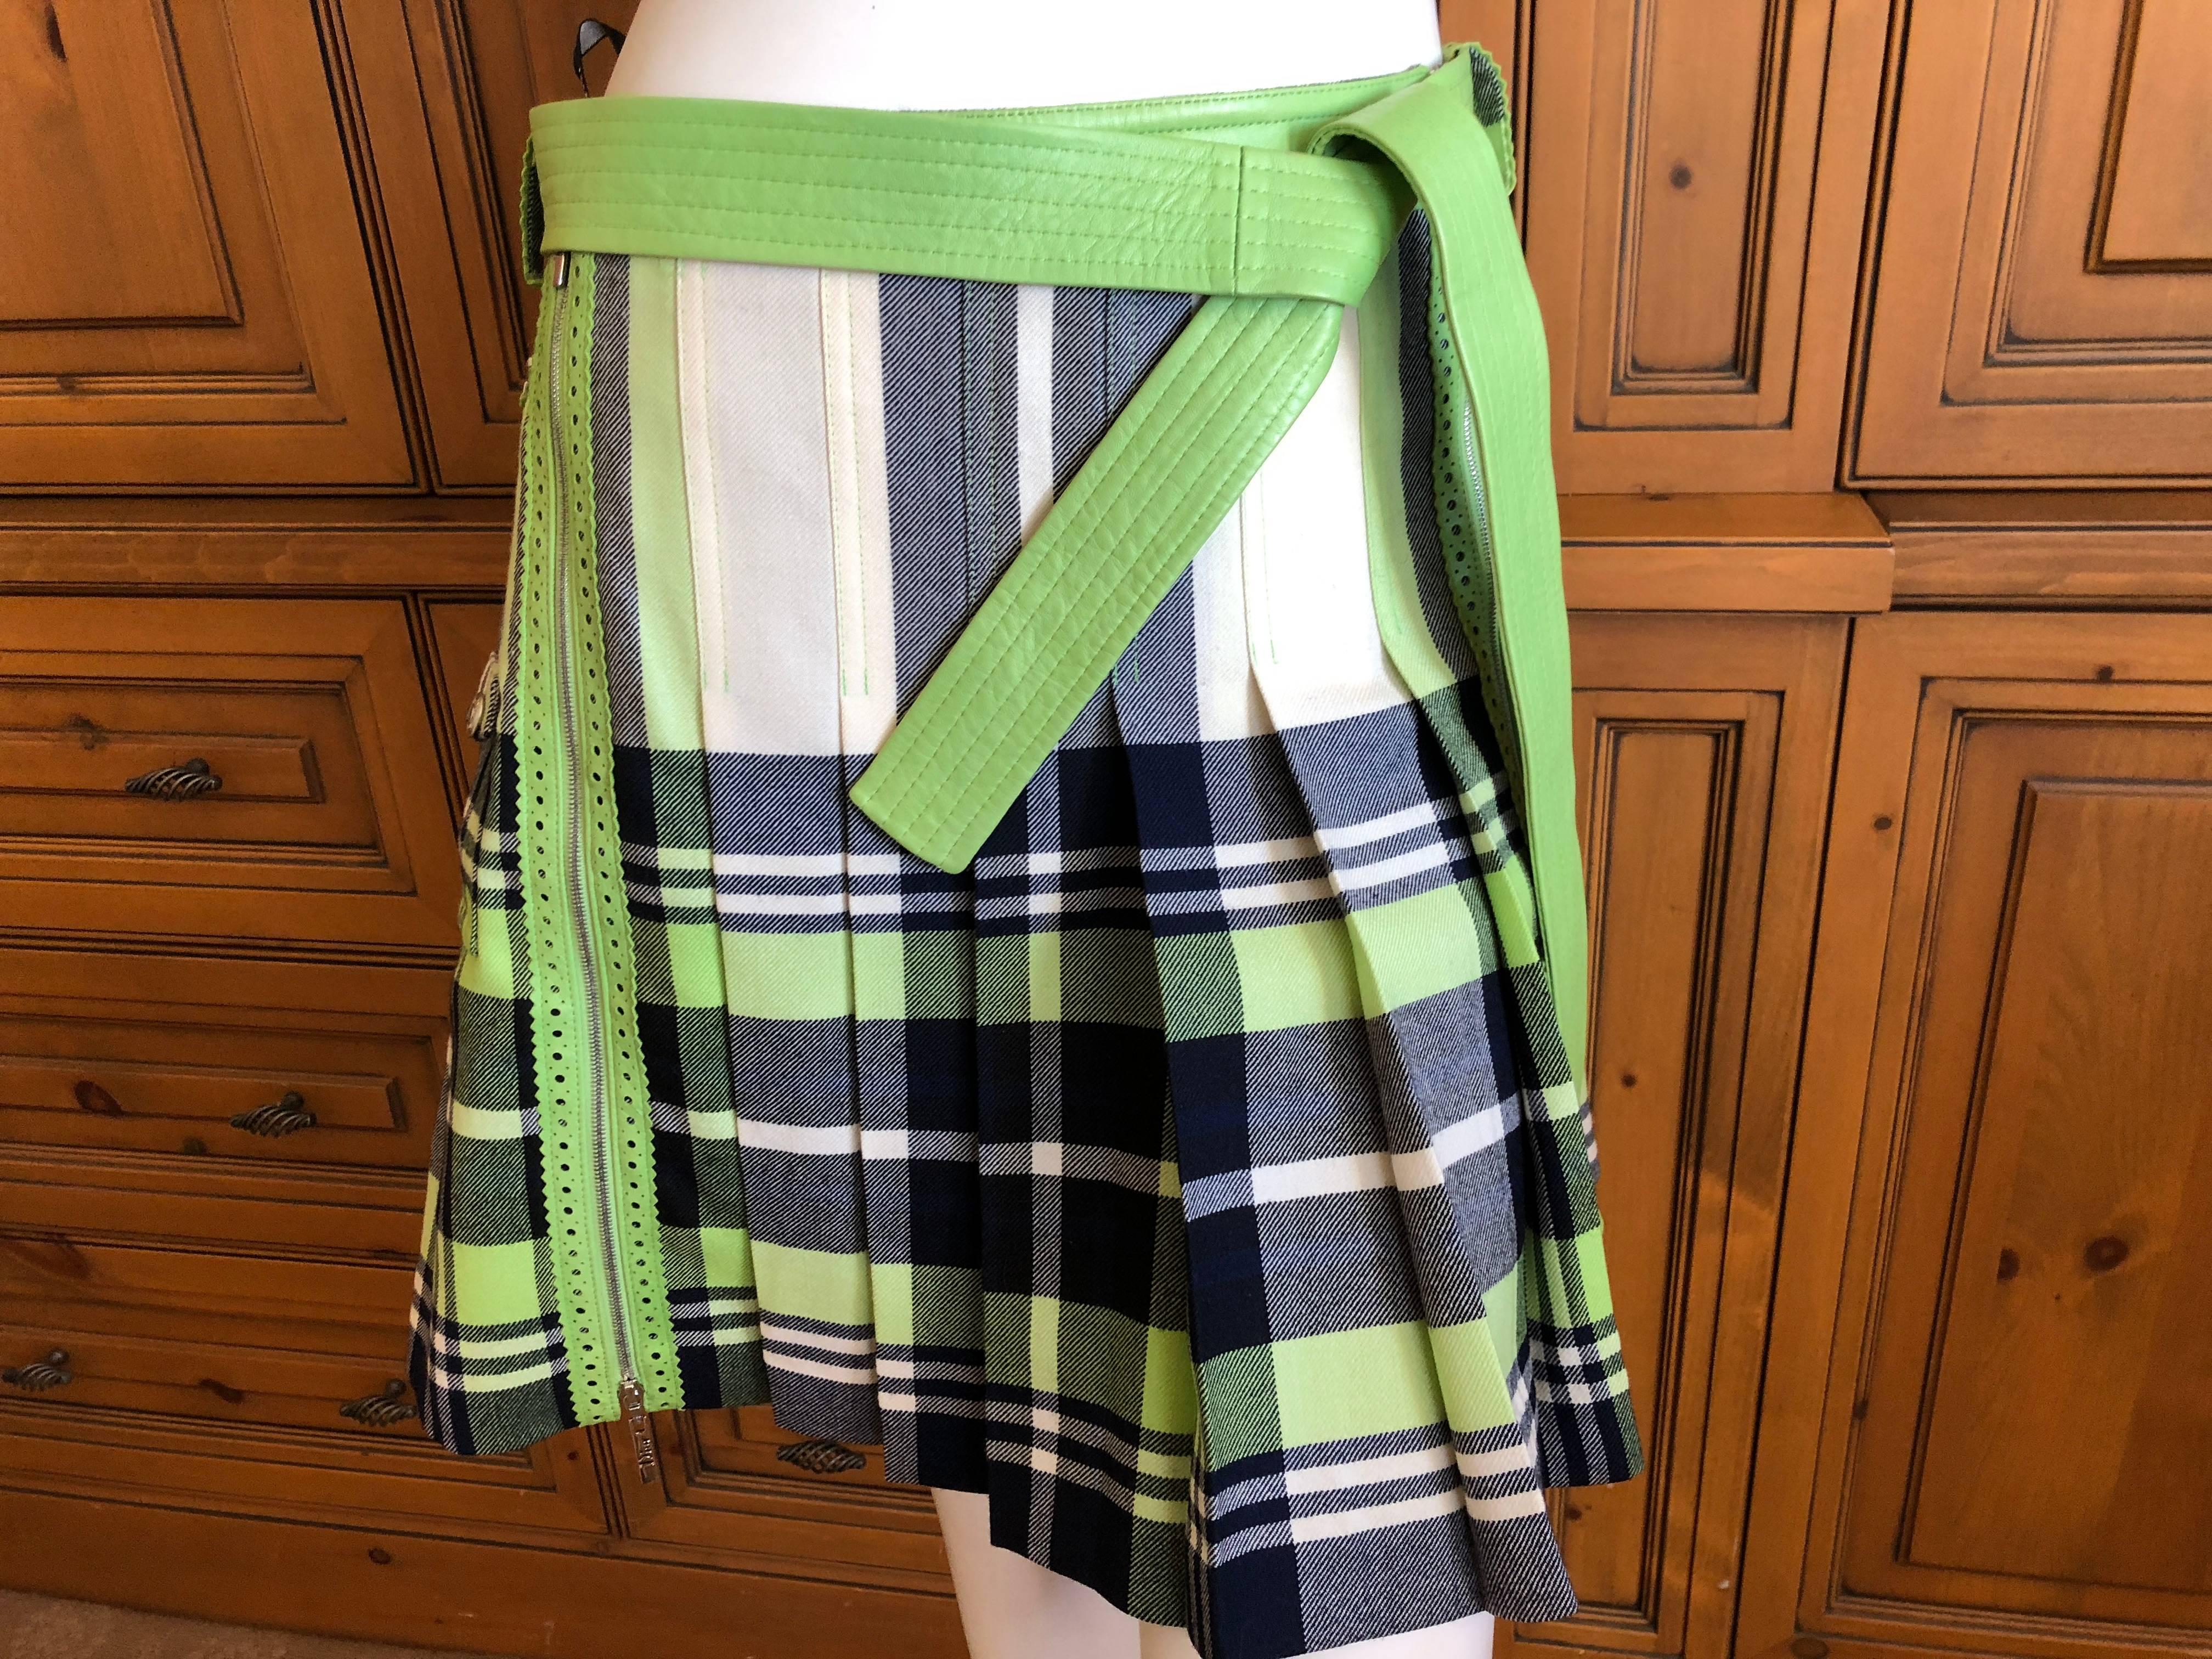 
Christian Dior John Galliano Vintage Leather Trim Pleated Plaid Schoolgirl Skirt.
Comes with leather tie belt
She 40
Waist 32